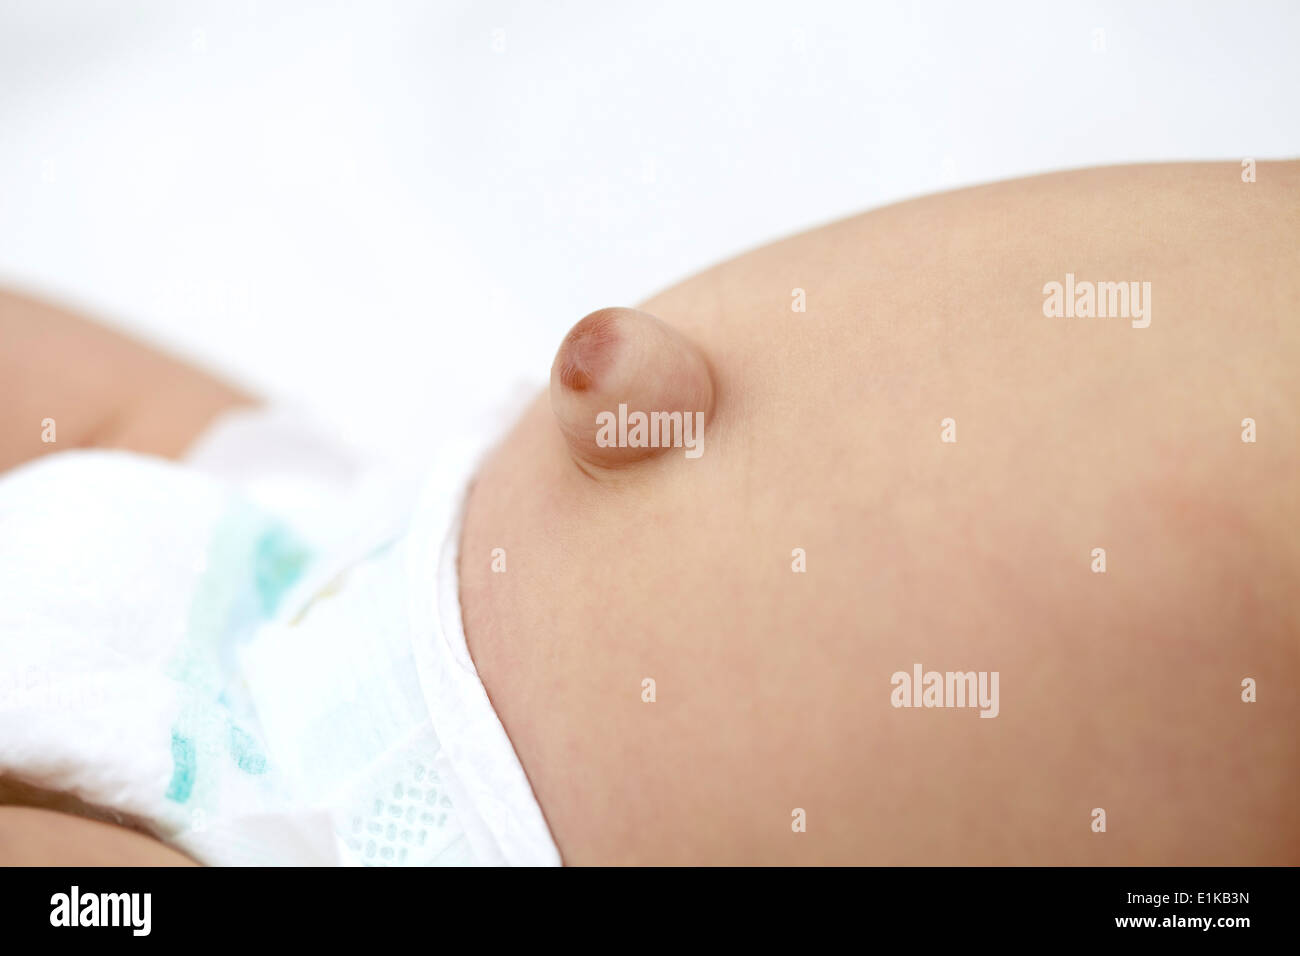 https://c8.alamy.com/comp/E1KB3N/model-released-baby-girl-with-umbilical-hernia-close-up-E1KB3N.jpg